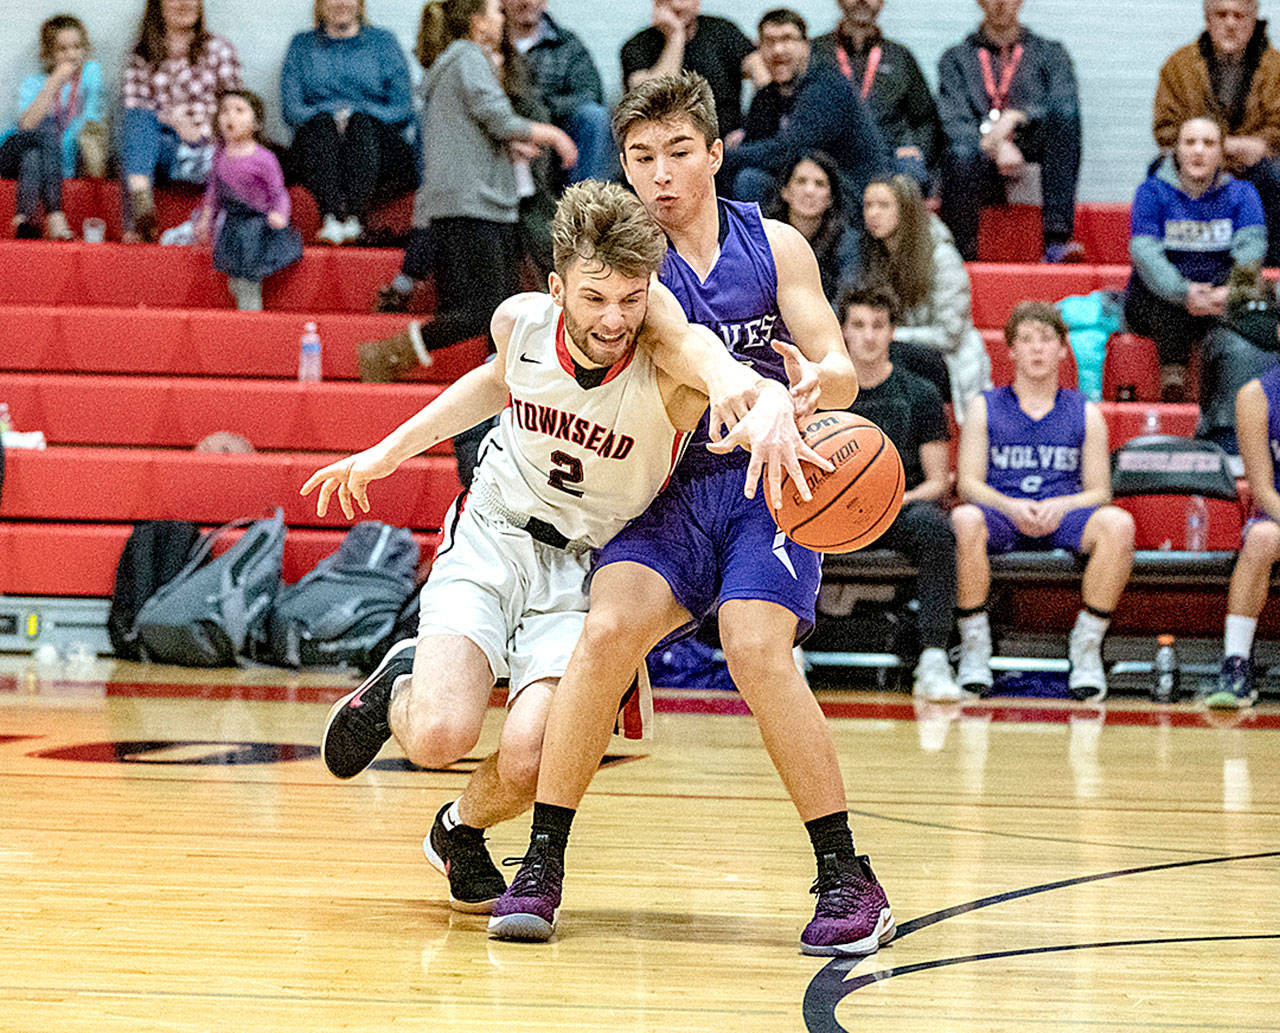 Port Townsend’s Jaden Watkins, 2, steals the ball away from Sequim’s Michael Young during a Crush in the Slush game played in Port Townsend on Saturday. (Steve Mullensky/for Peninsula Daily News)